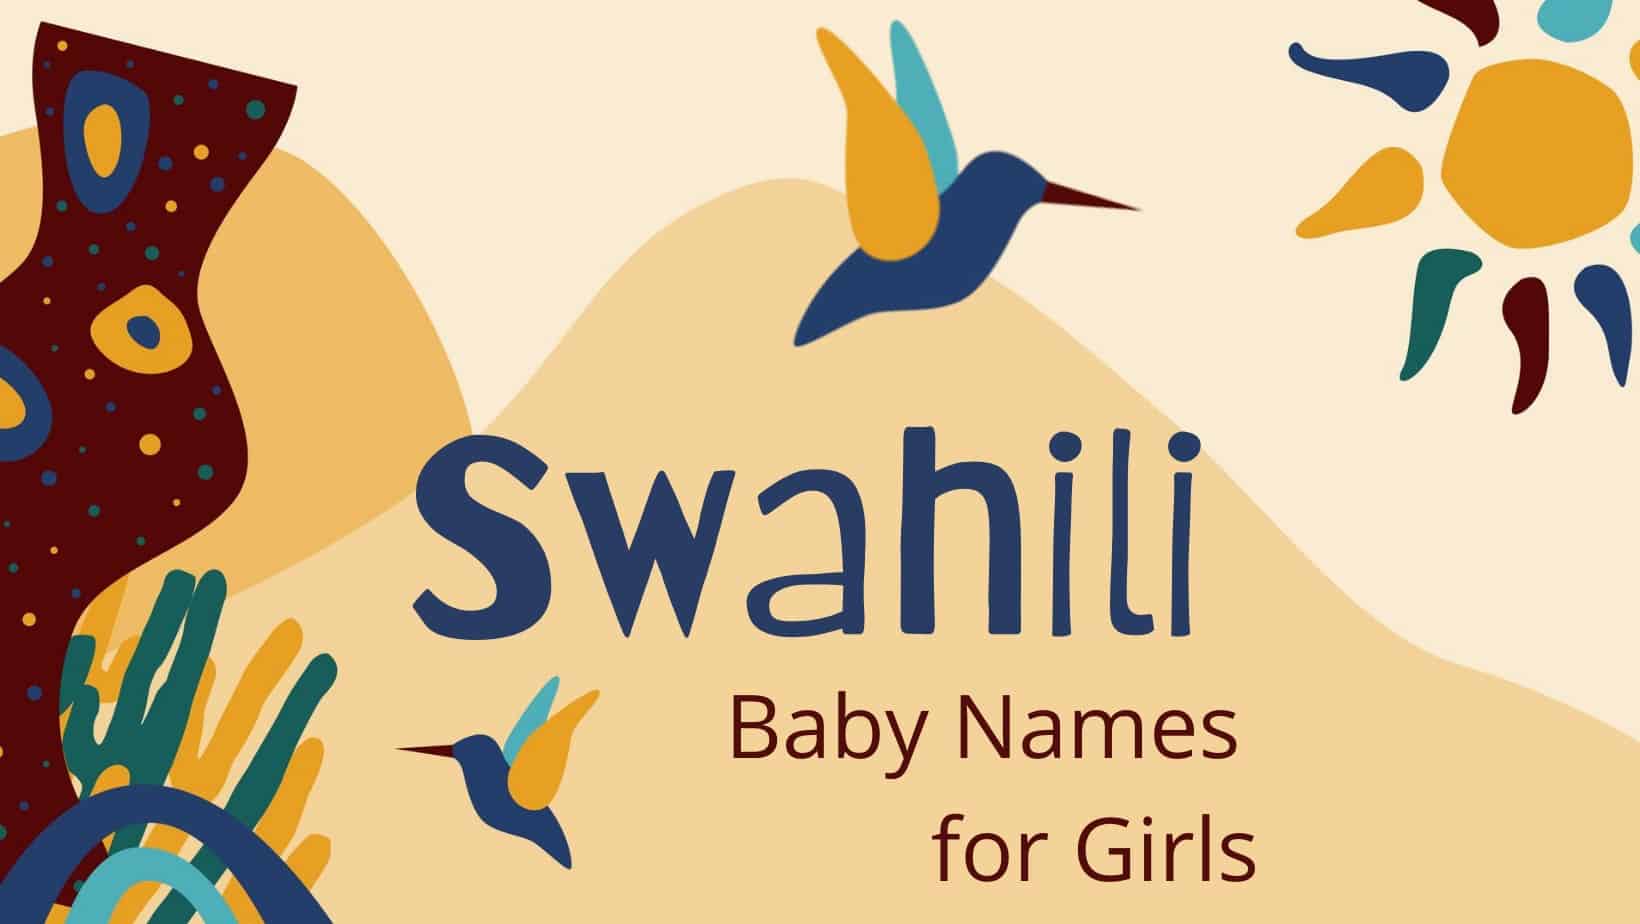 Swahili baby names for girls